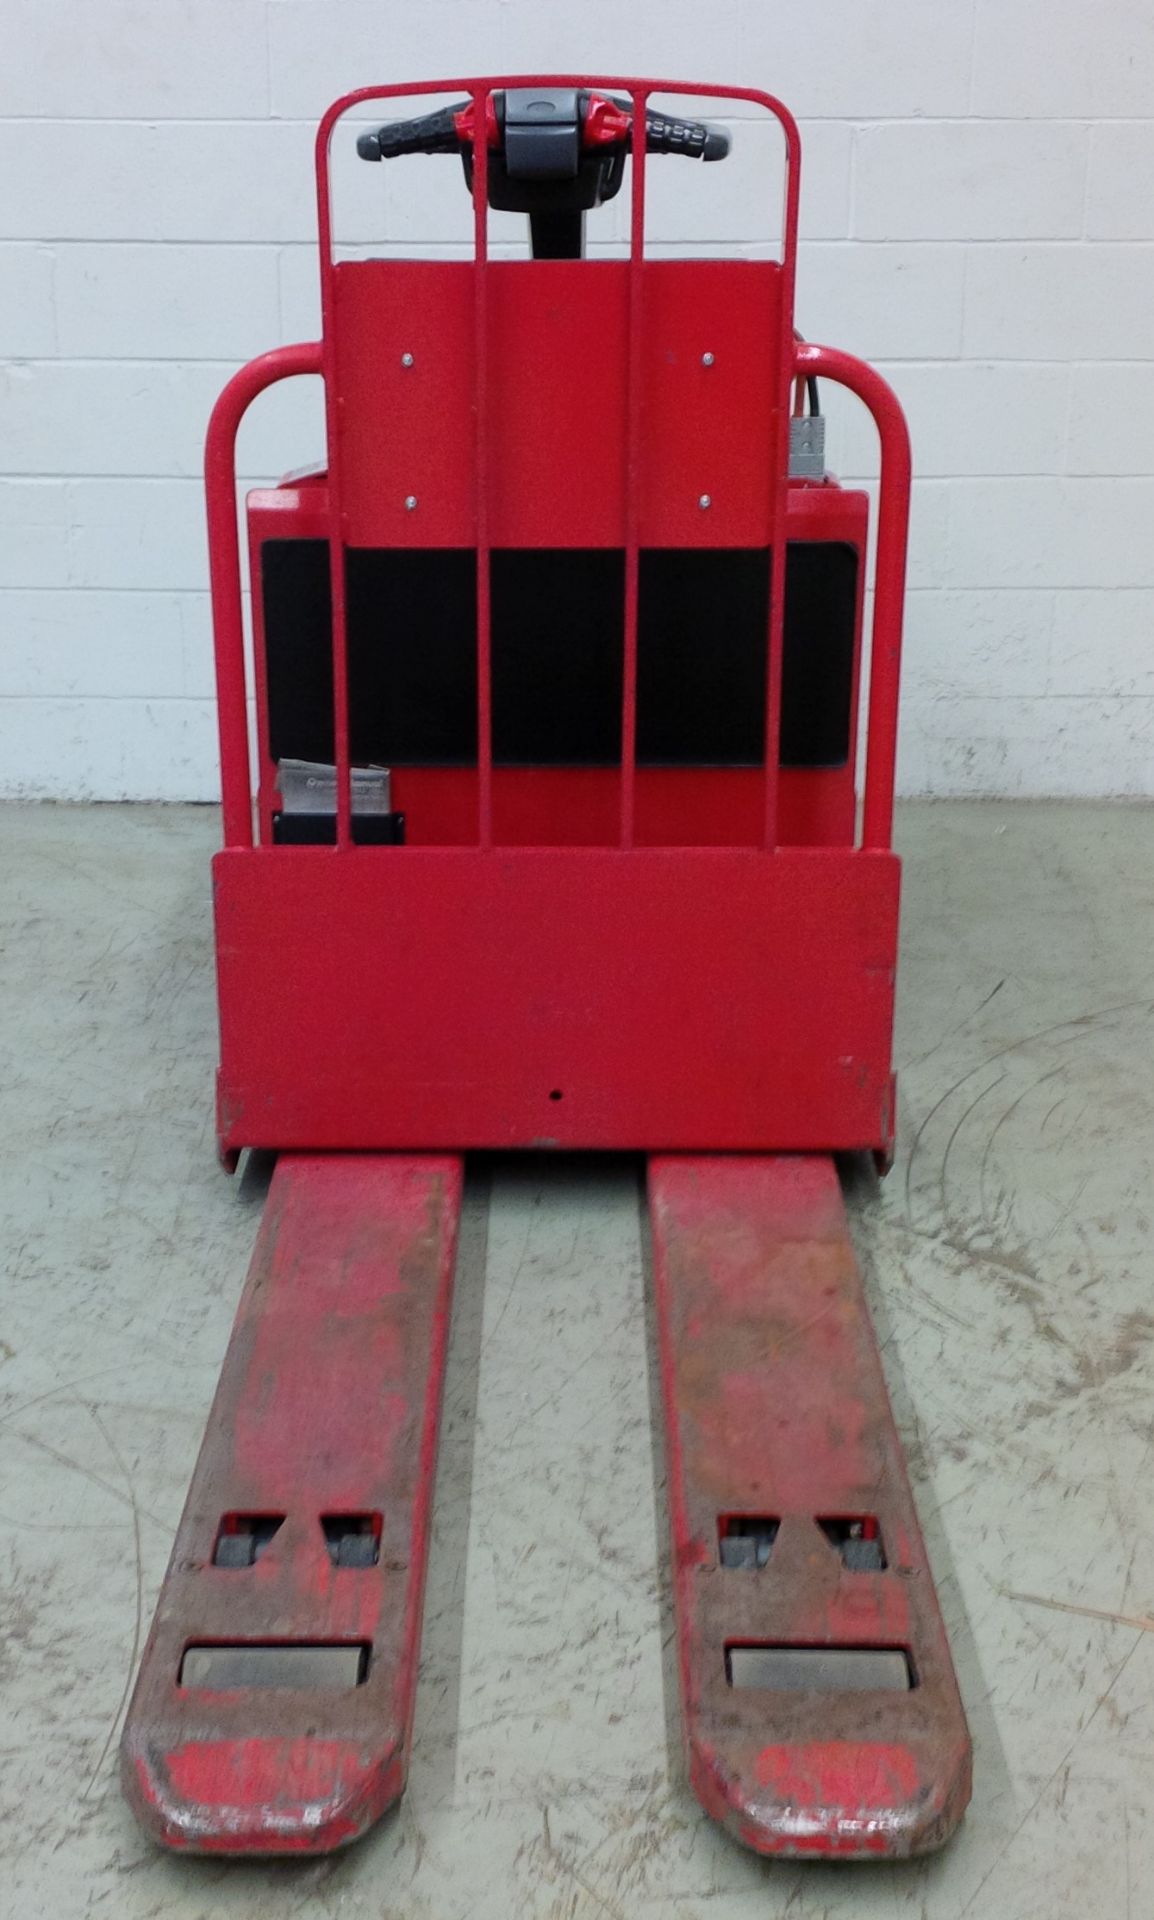 RAYMOND (2008) 8500 24V ELECTRIC RIDE-ON PALLET JACK WITH 6000 LB. CAPACITY, HAWKER POWER GUARD - Image 3 of 5